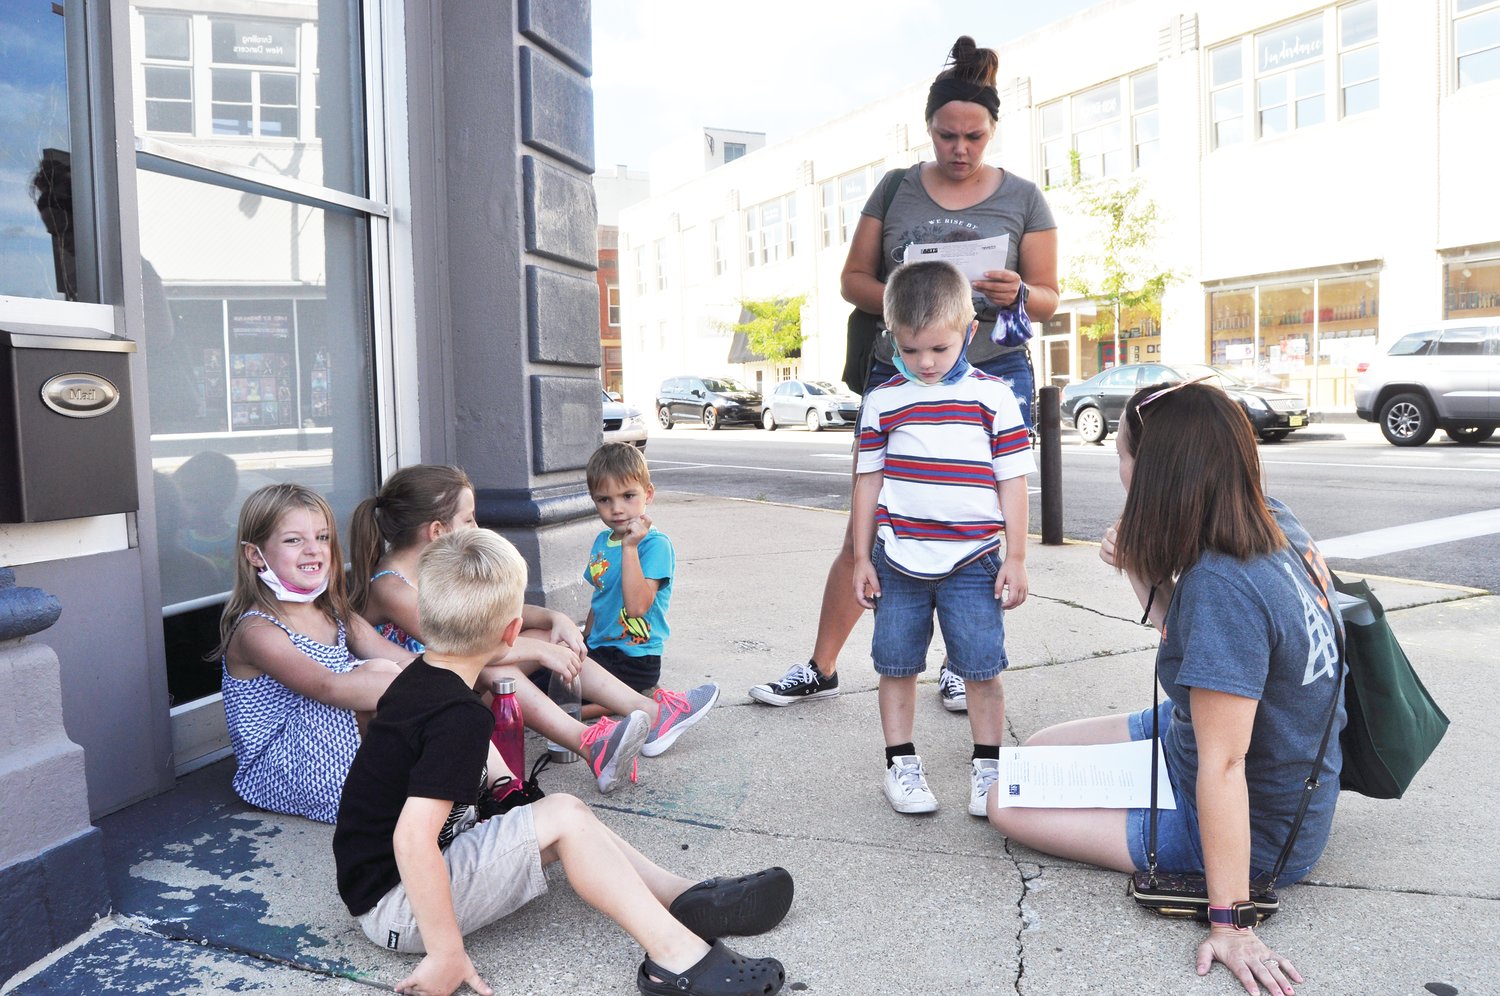 Chelsea Emberton checks the clues as Amber Wheeldon and, from left, Kartyr, Charlie, Boston, Kreed and Colt take a break during Athens Arts Gallery's Art Quest on Saturday in downtown Crawfordsville. The clues led to cultural attractions such as the Rotary Jail Museum and Speed Cabin.